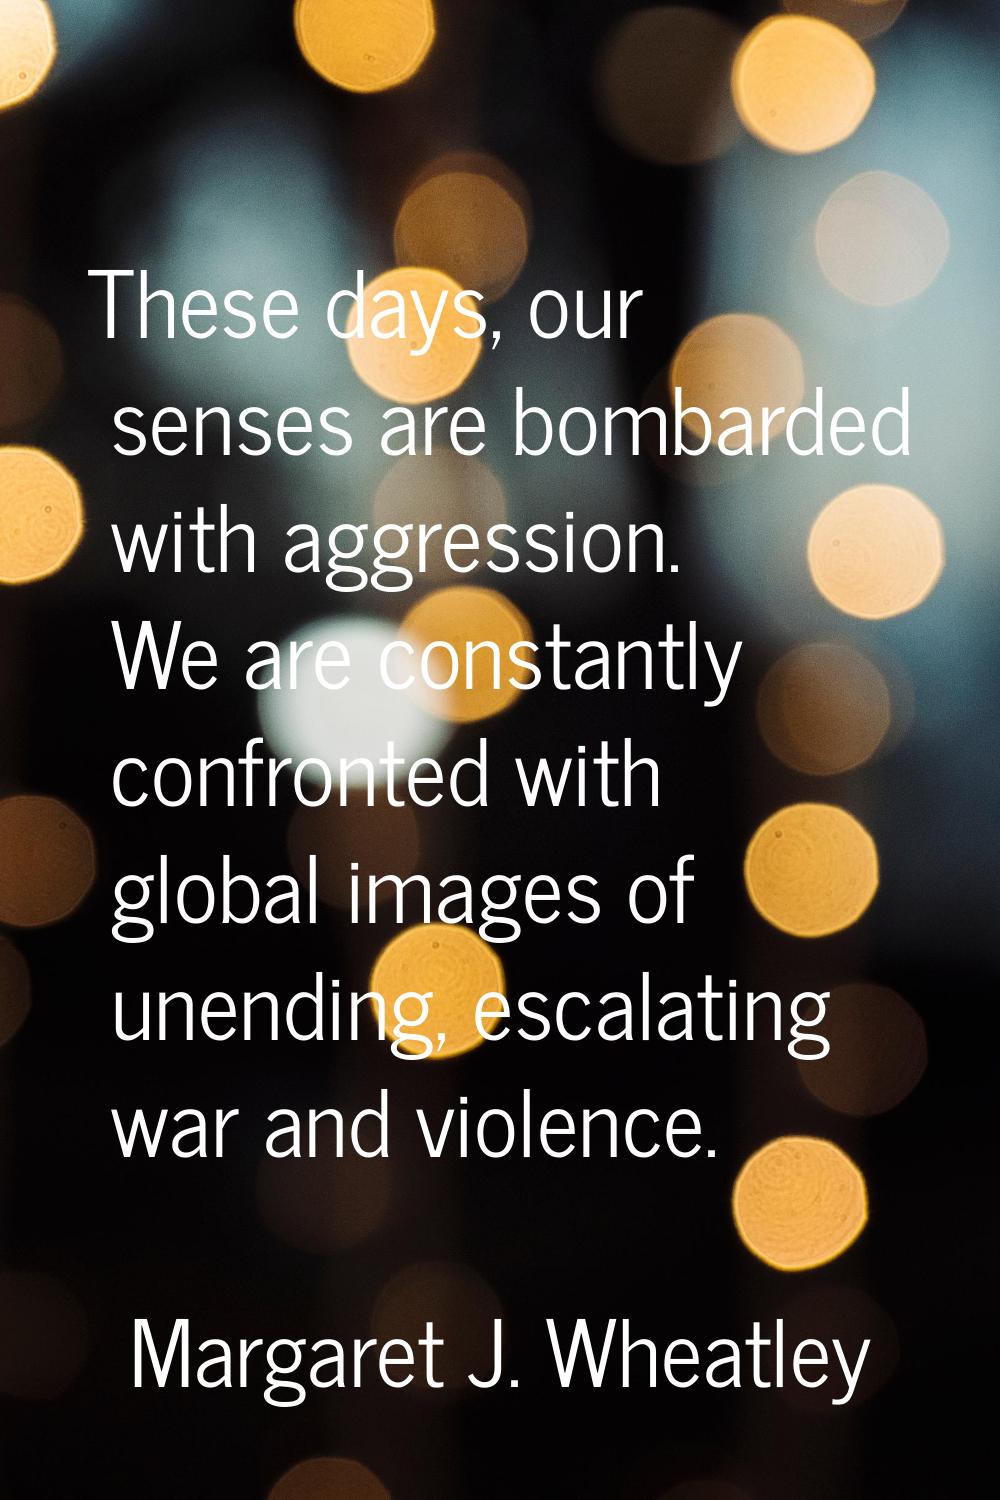 These days, our senses are bombarded with aggression. We are constantly confronted with global imag